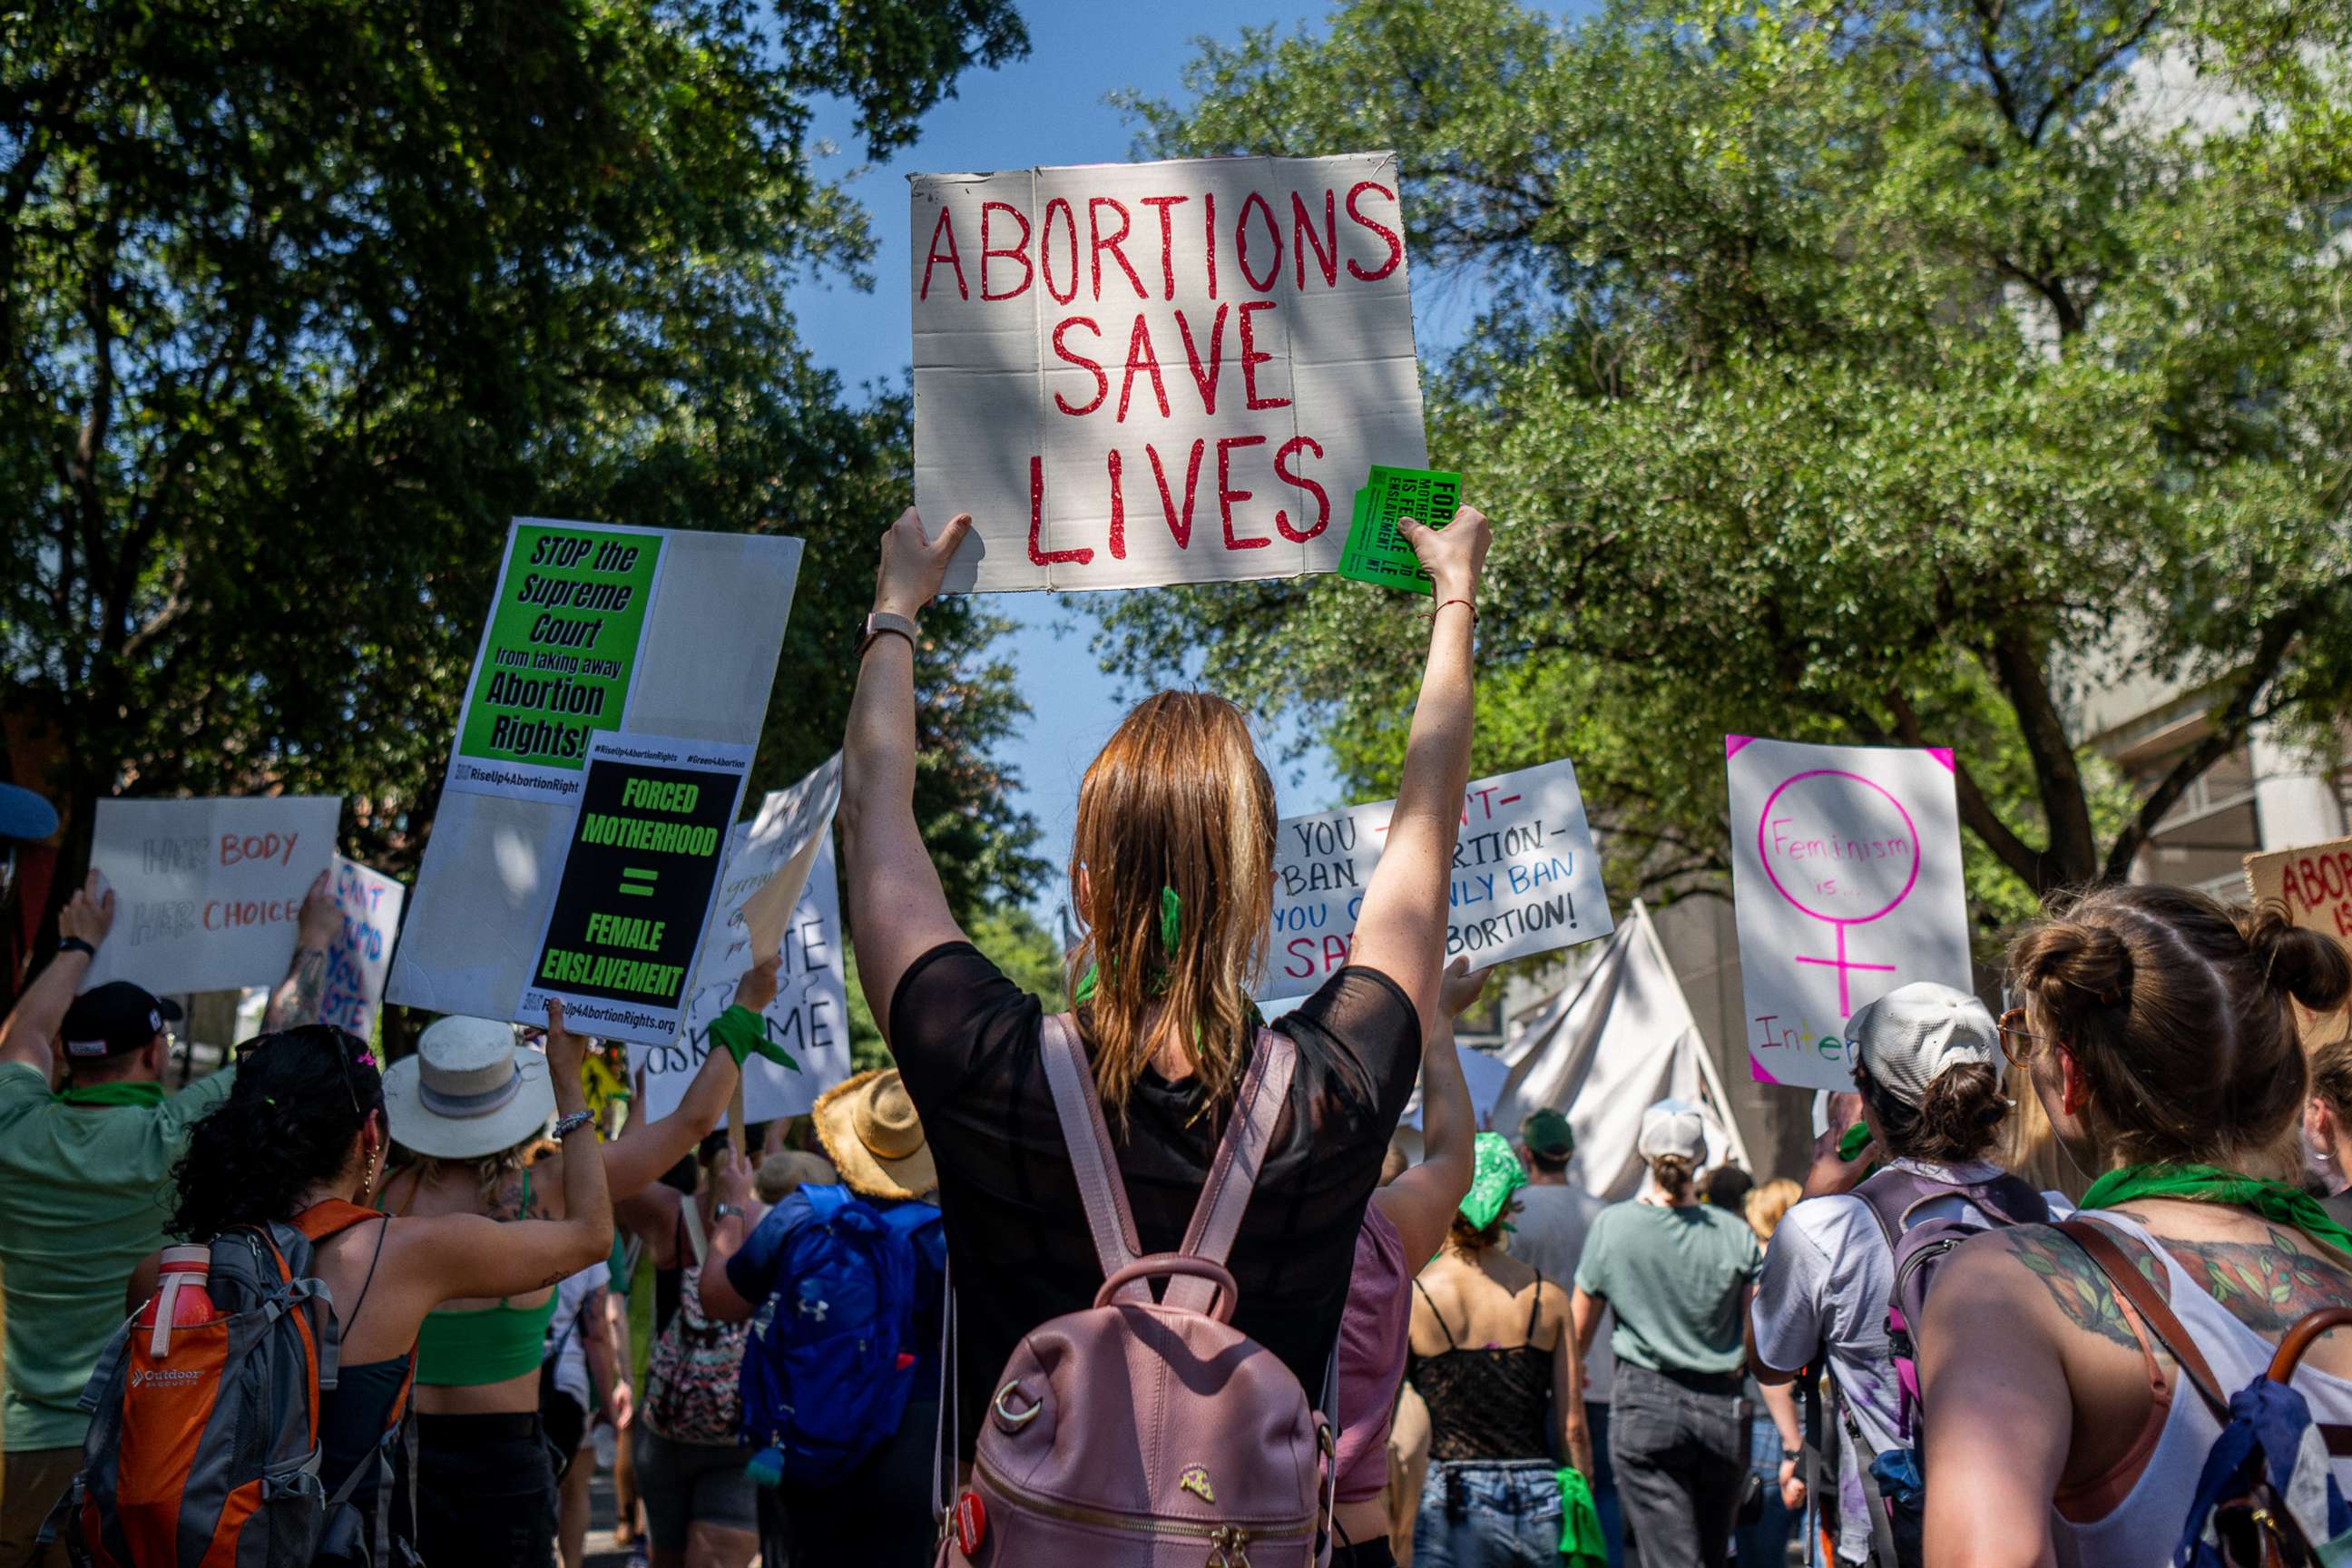 PHOTO: Abortion rights activists and supporters march outside of the Austin Convention Center on May 14, 2022 in Austin, Texas.